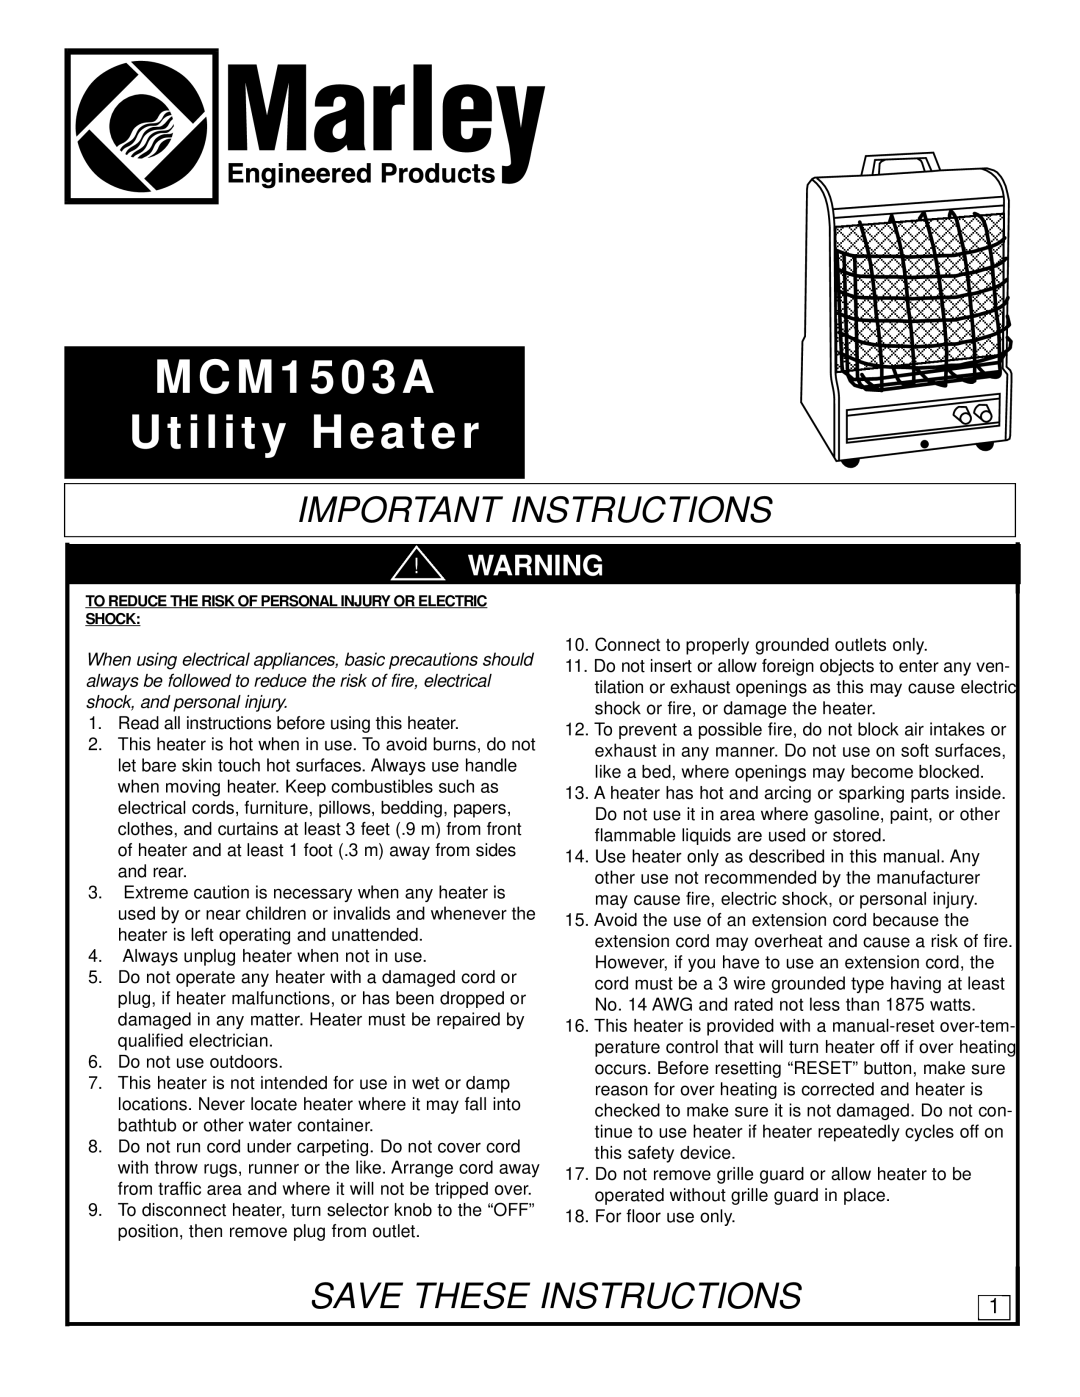 Marley Engineered Products MCM1503A manual M C M 1 5 0 3 A U t i l i t y H e a t e r, Important Instructions 